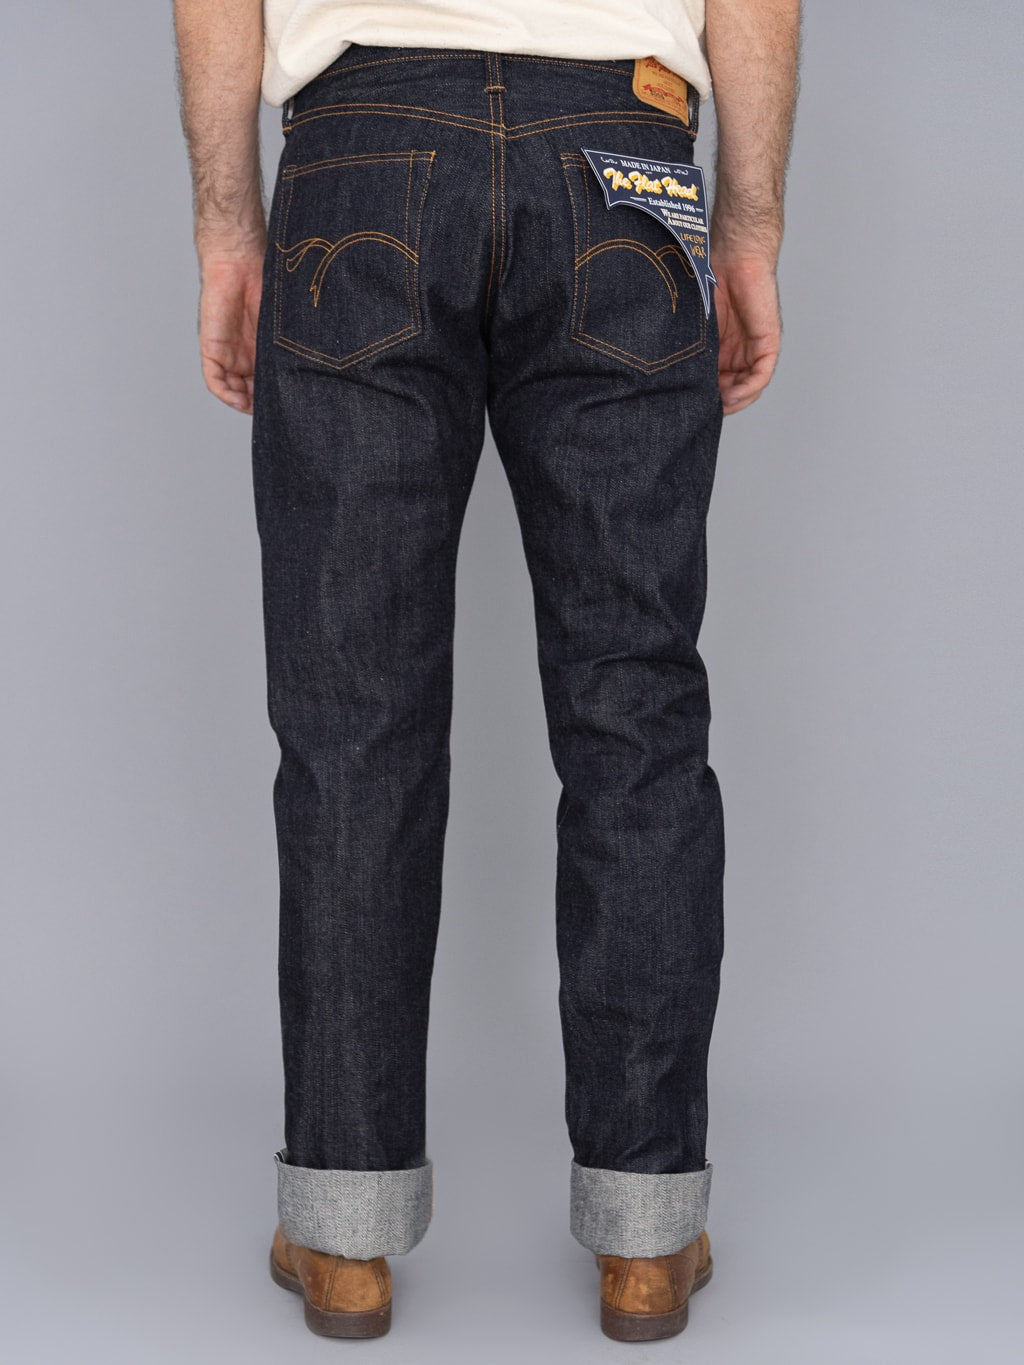 The Flat Head 3009 14.5oz straight tapered Jeans back fit